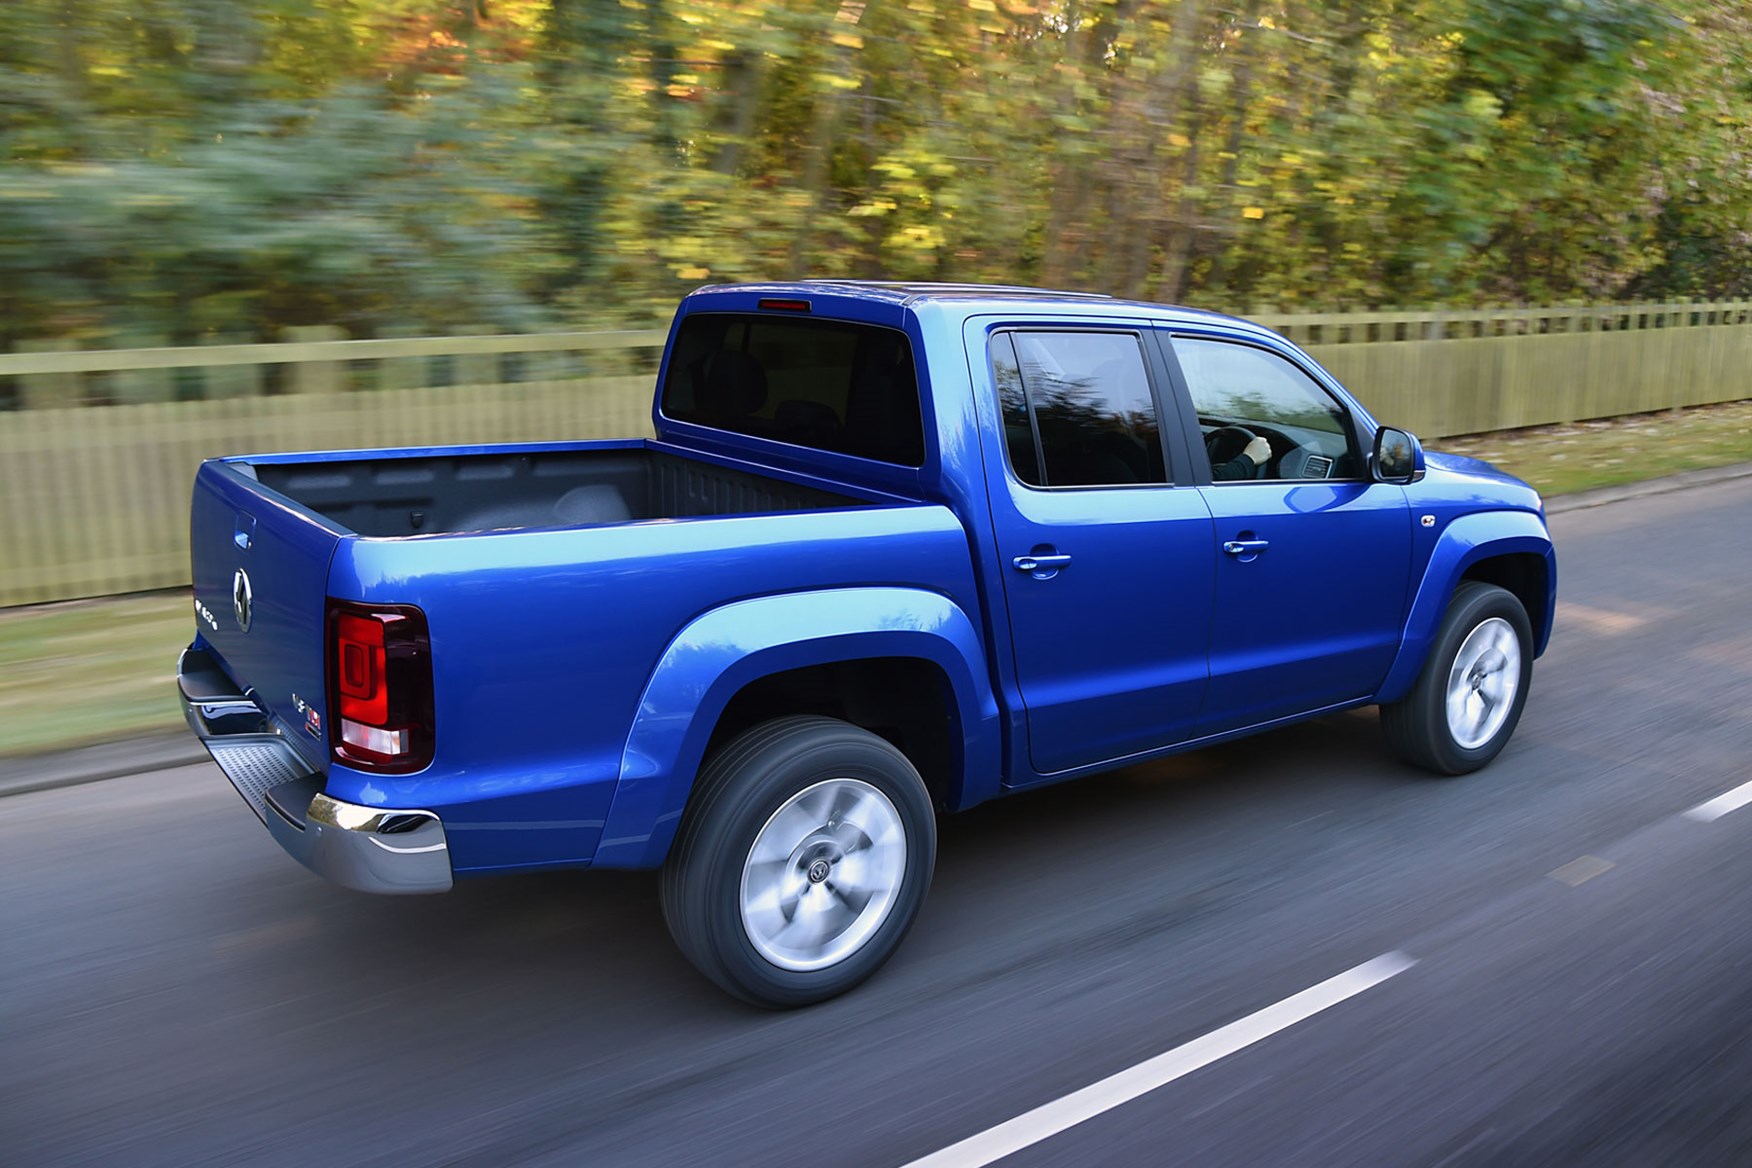 VW Amarok V6 Aventura 224hp review - rear view, driving on road, blue